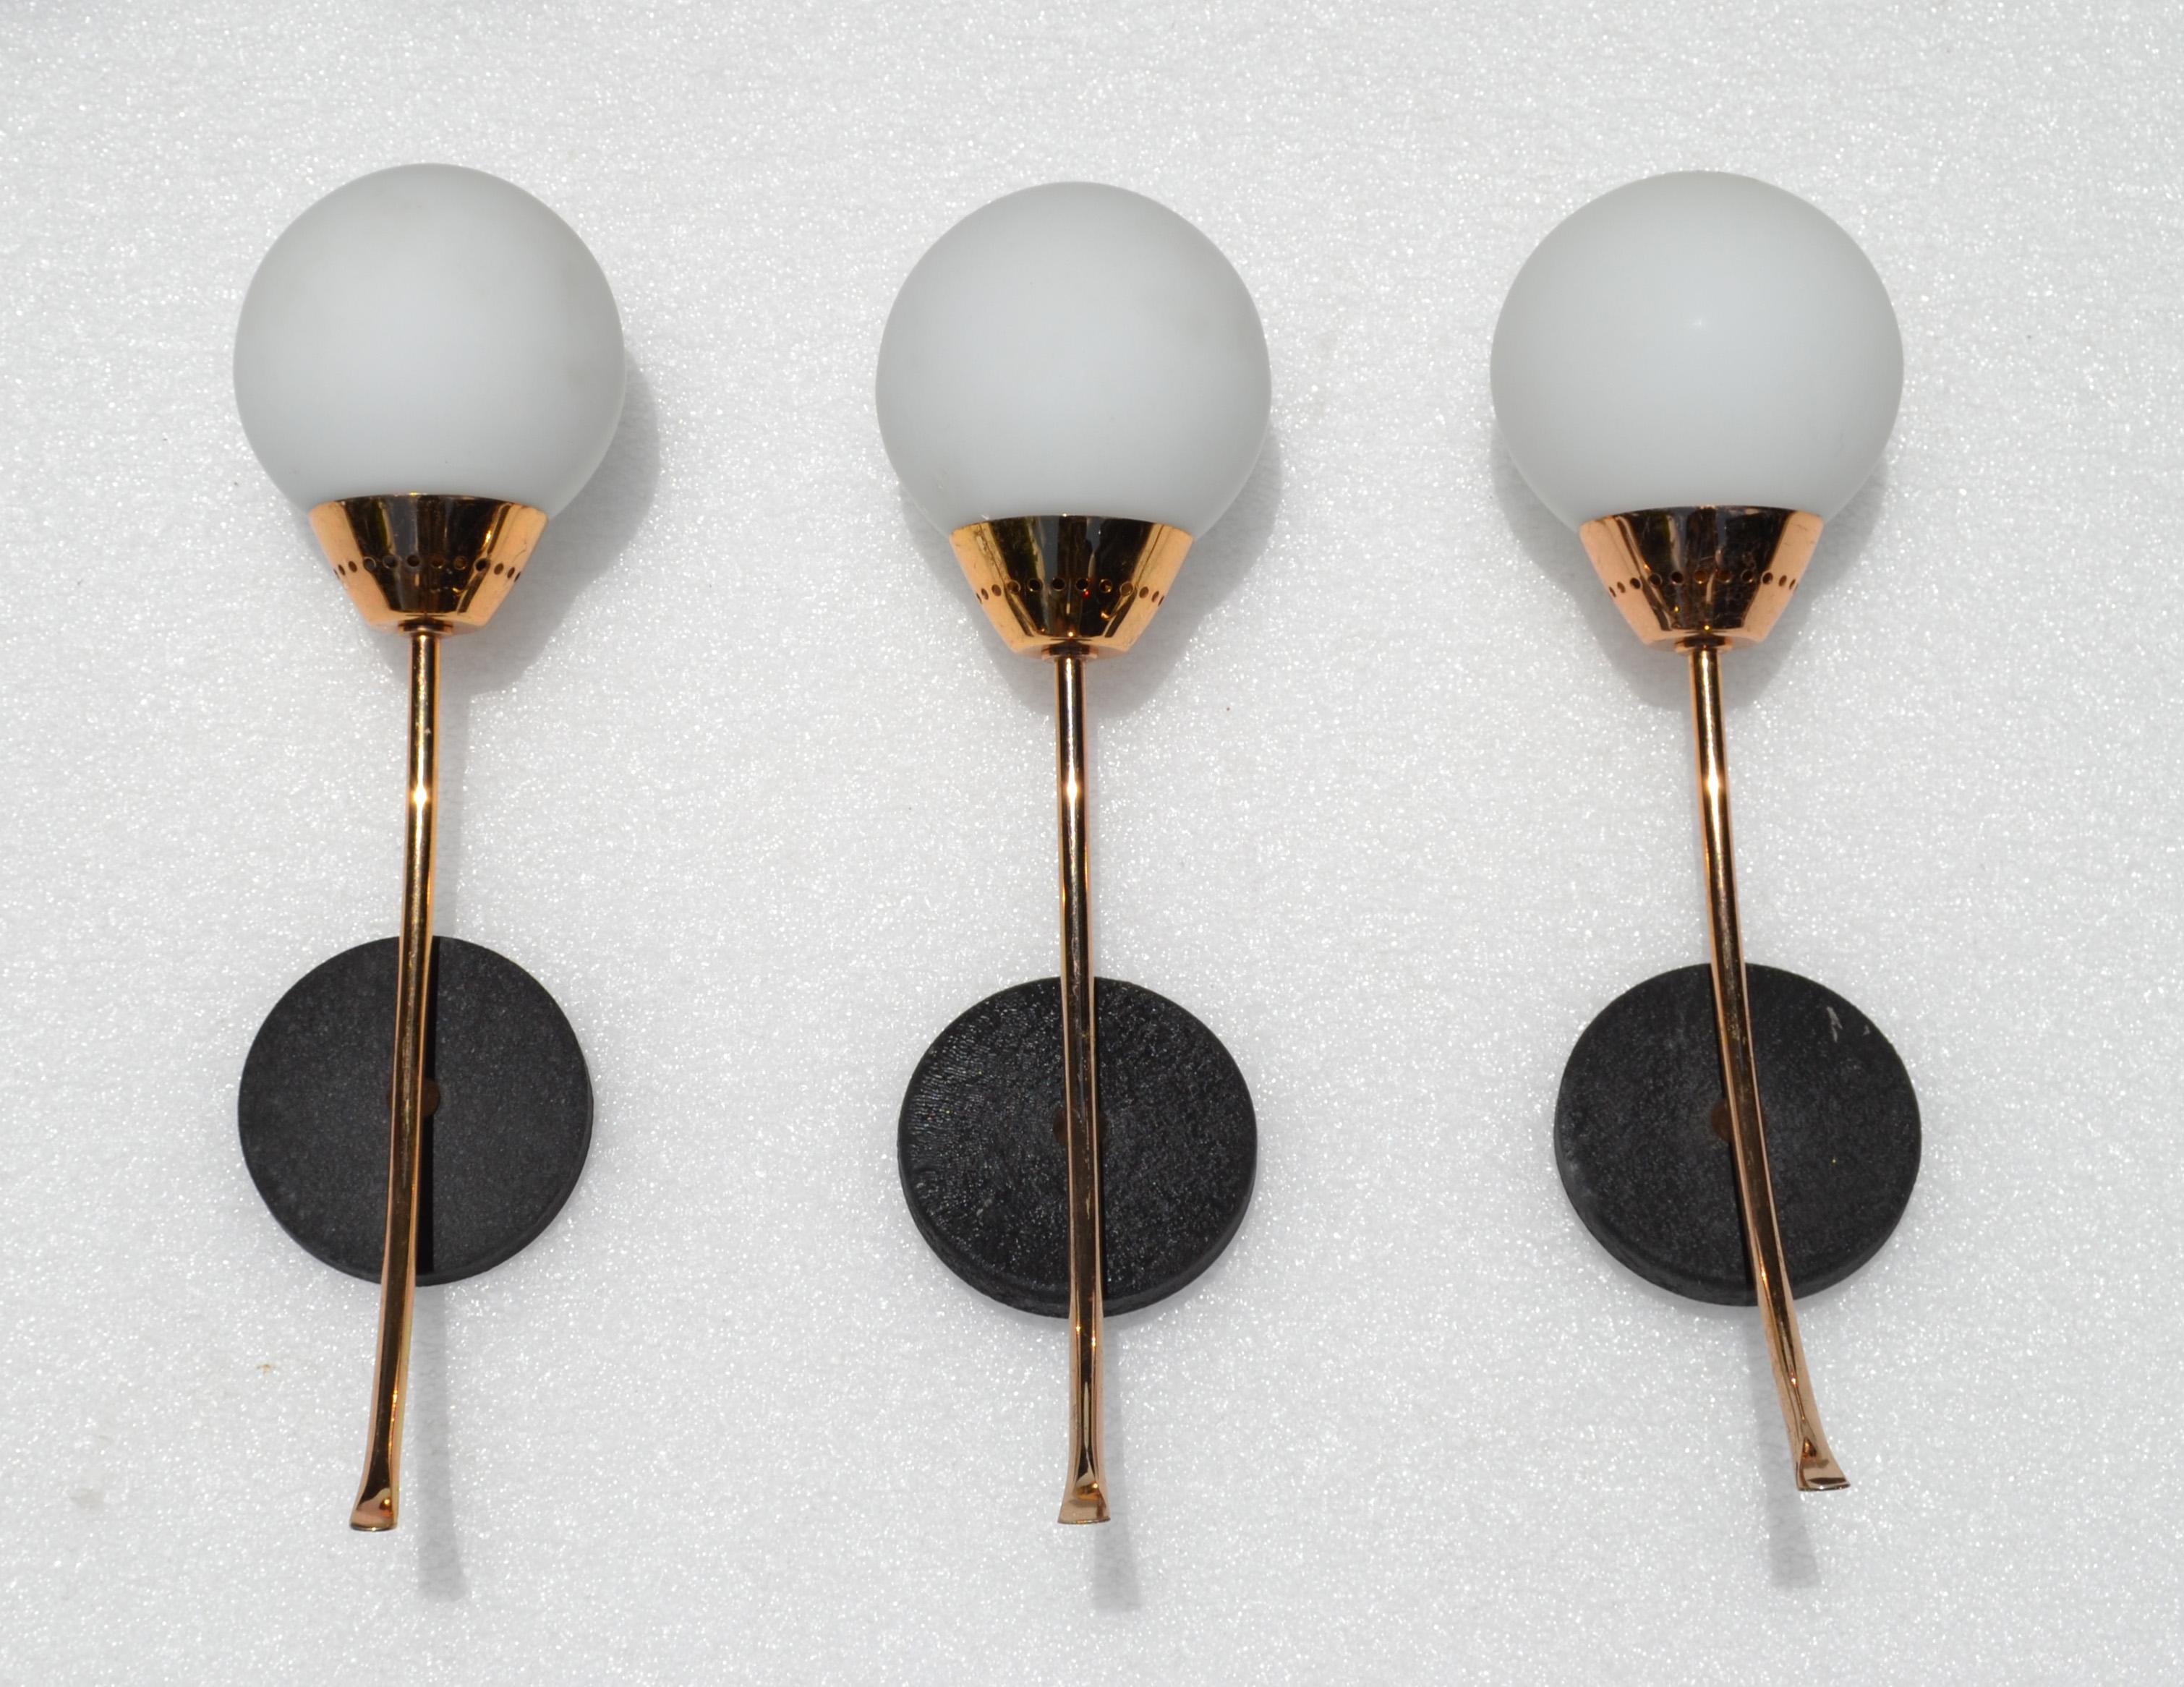 Set of 3 one light Maison Arlus brass sconces with round blown Opaline Glass globe gives a very nice light.
in working condition, takes 60 watts max bulb or LED.
Round Back Plate measure: 3.38 inches diameter. Junction box covers are available for